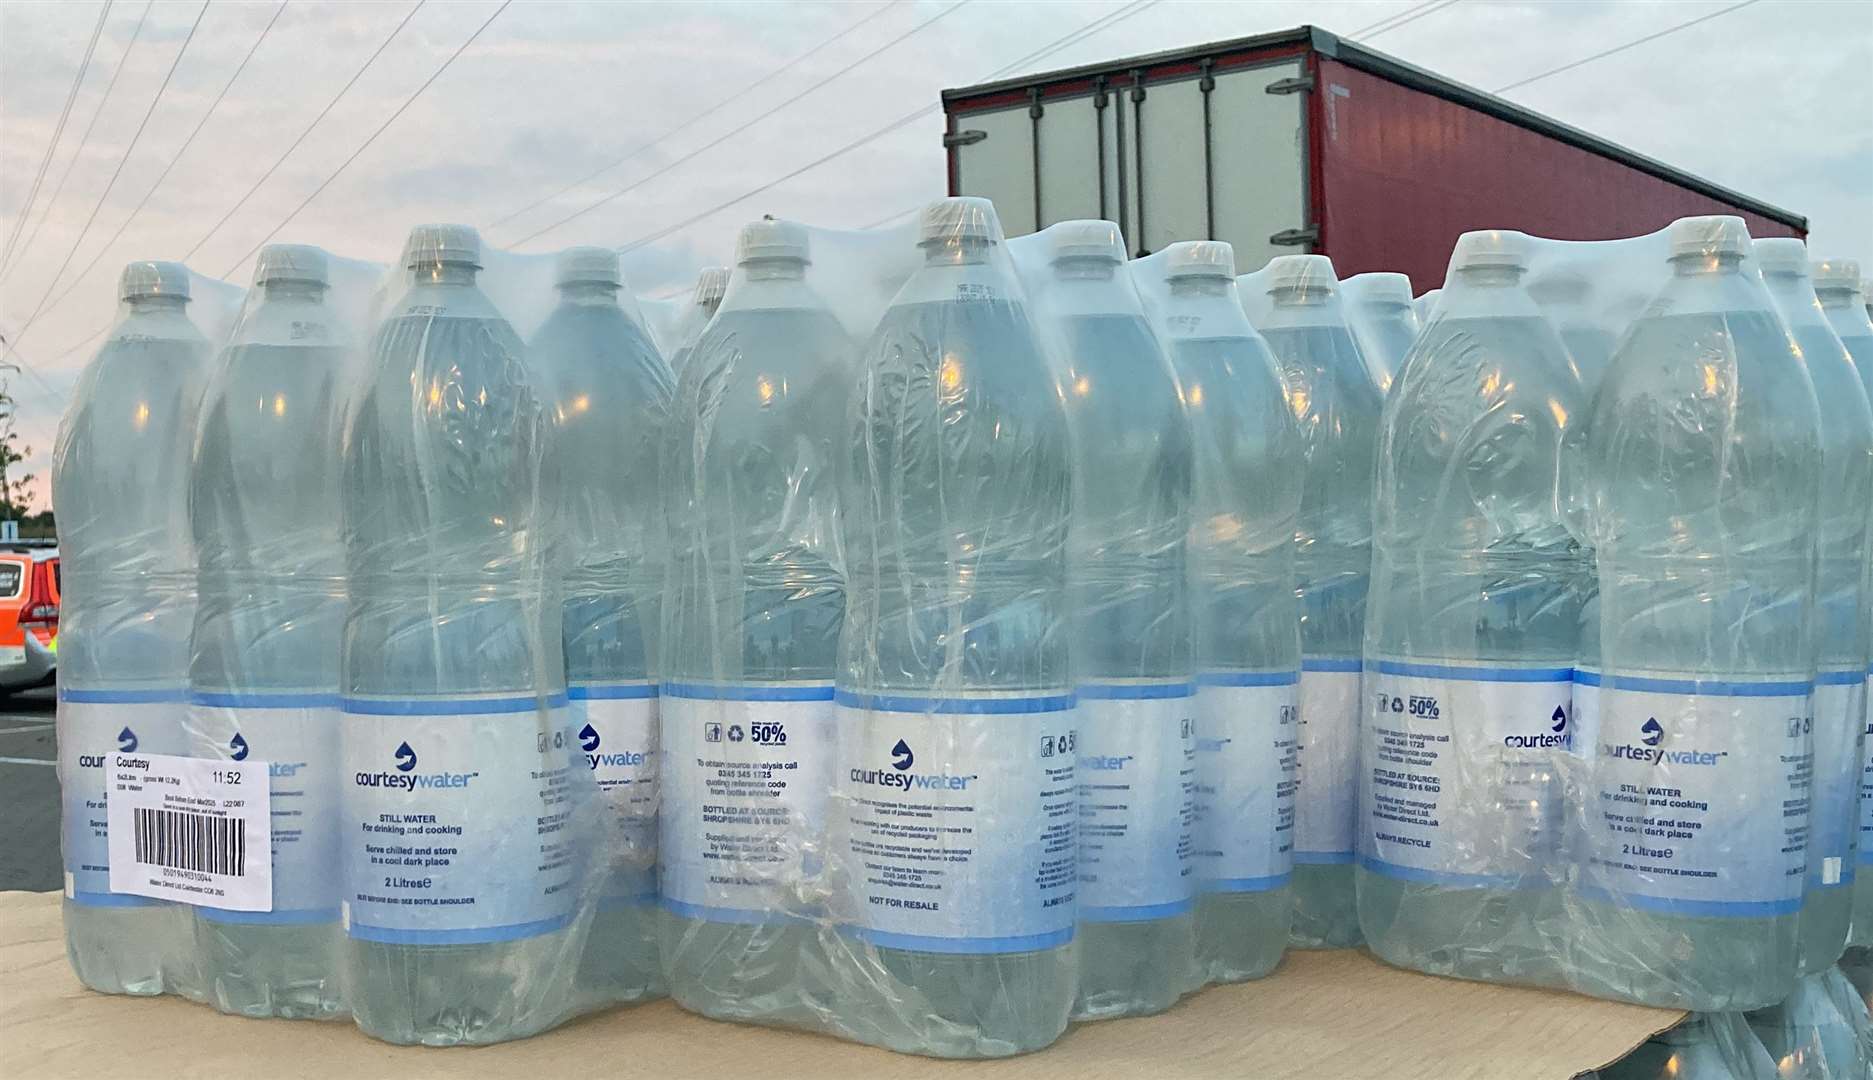 Bottled water is now being distributed by Southern Water